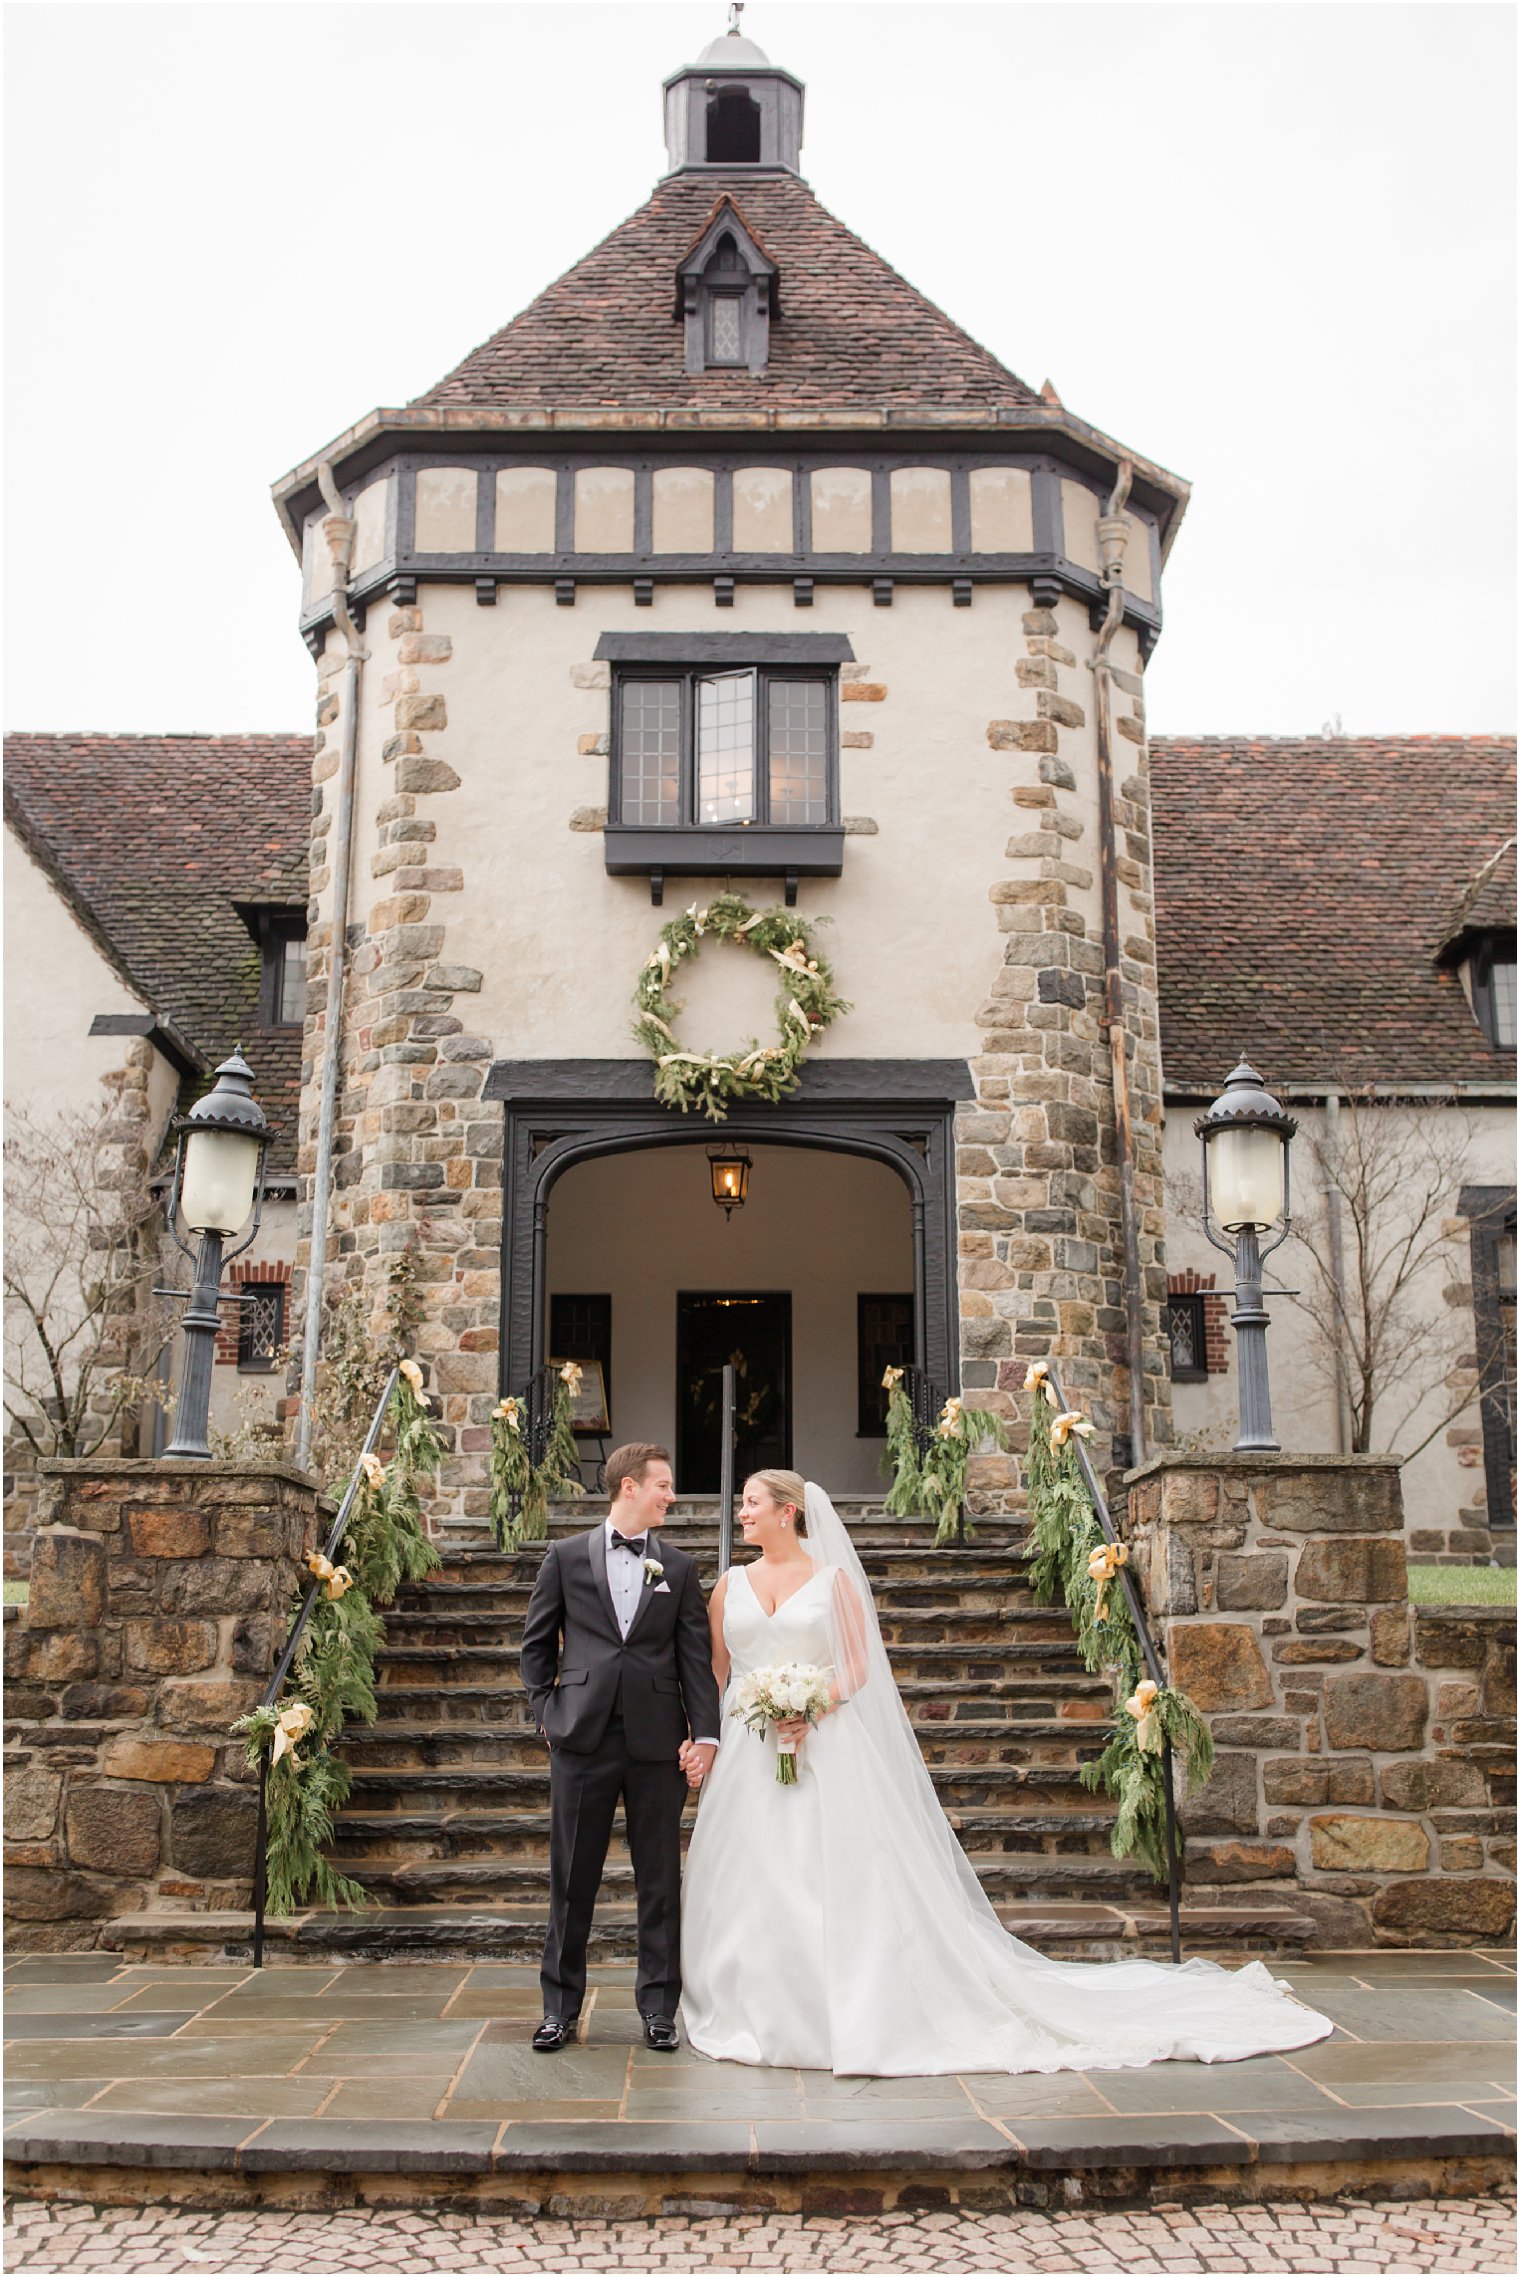 formal bride and groom photo at Pleasantdale Chateau